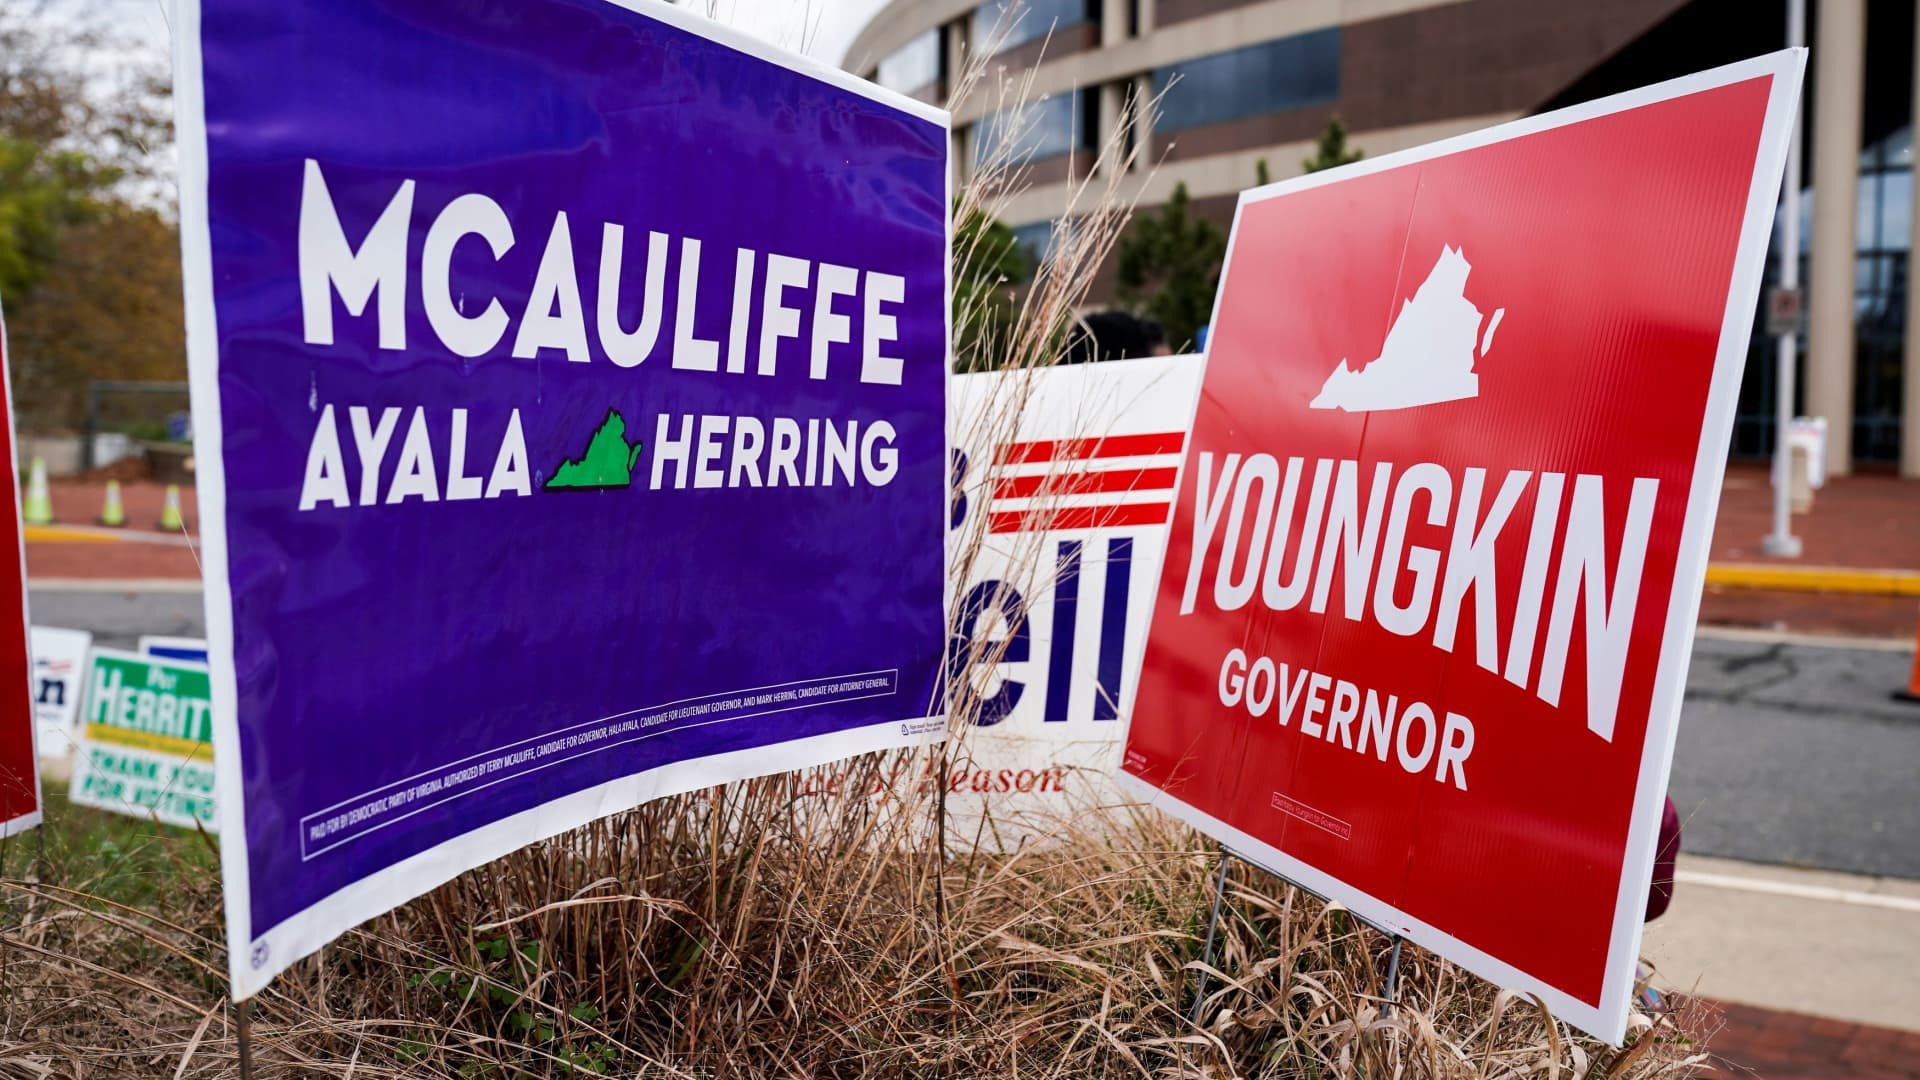 Campaign signs for Democrat Terry McAuliffe and Republican Glenn Youngkin stand together on the last day of early voting in the Virginia gubernatorial election in Fairfax, Virginia, U.S., October 30, 2021.